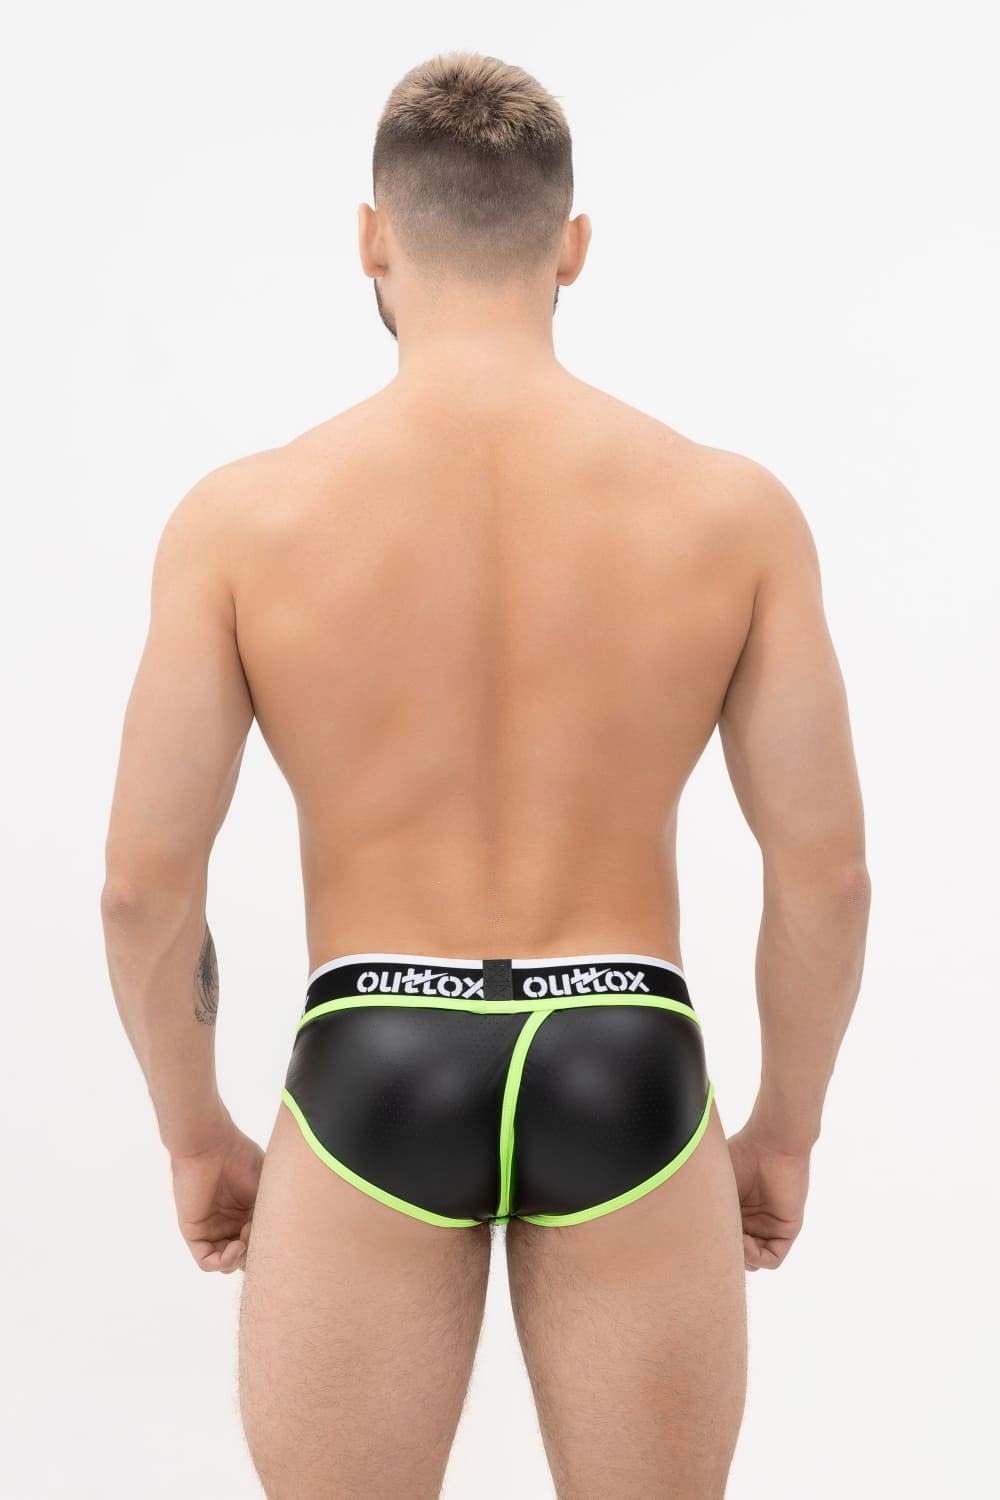 Outtox. Wrapped Rear Briefs with Snap Codpiece. Black+Green 'Neon'